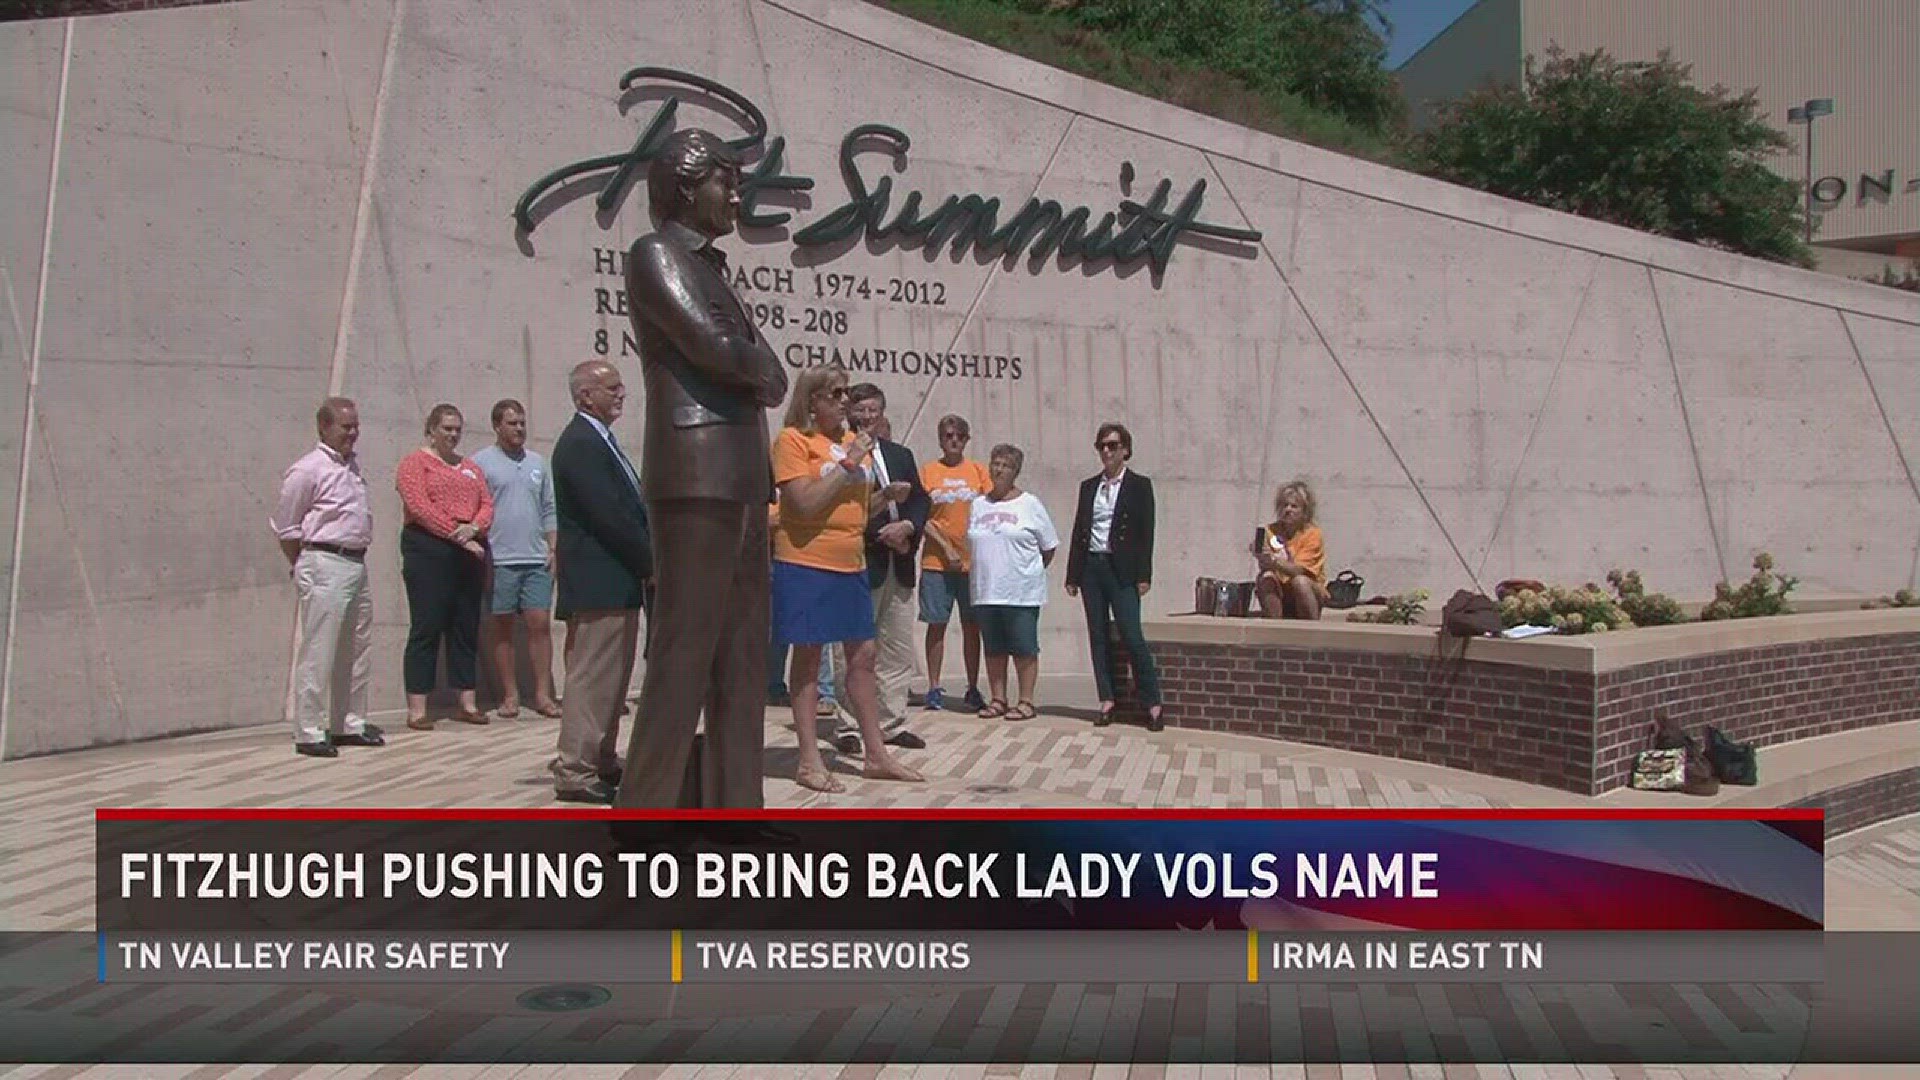 Fitzhugh, D-Ripley,  joined Bring Back the Lady Vols organizers today in front of the Pat Summitt statue on the University of Tennessee's campus.